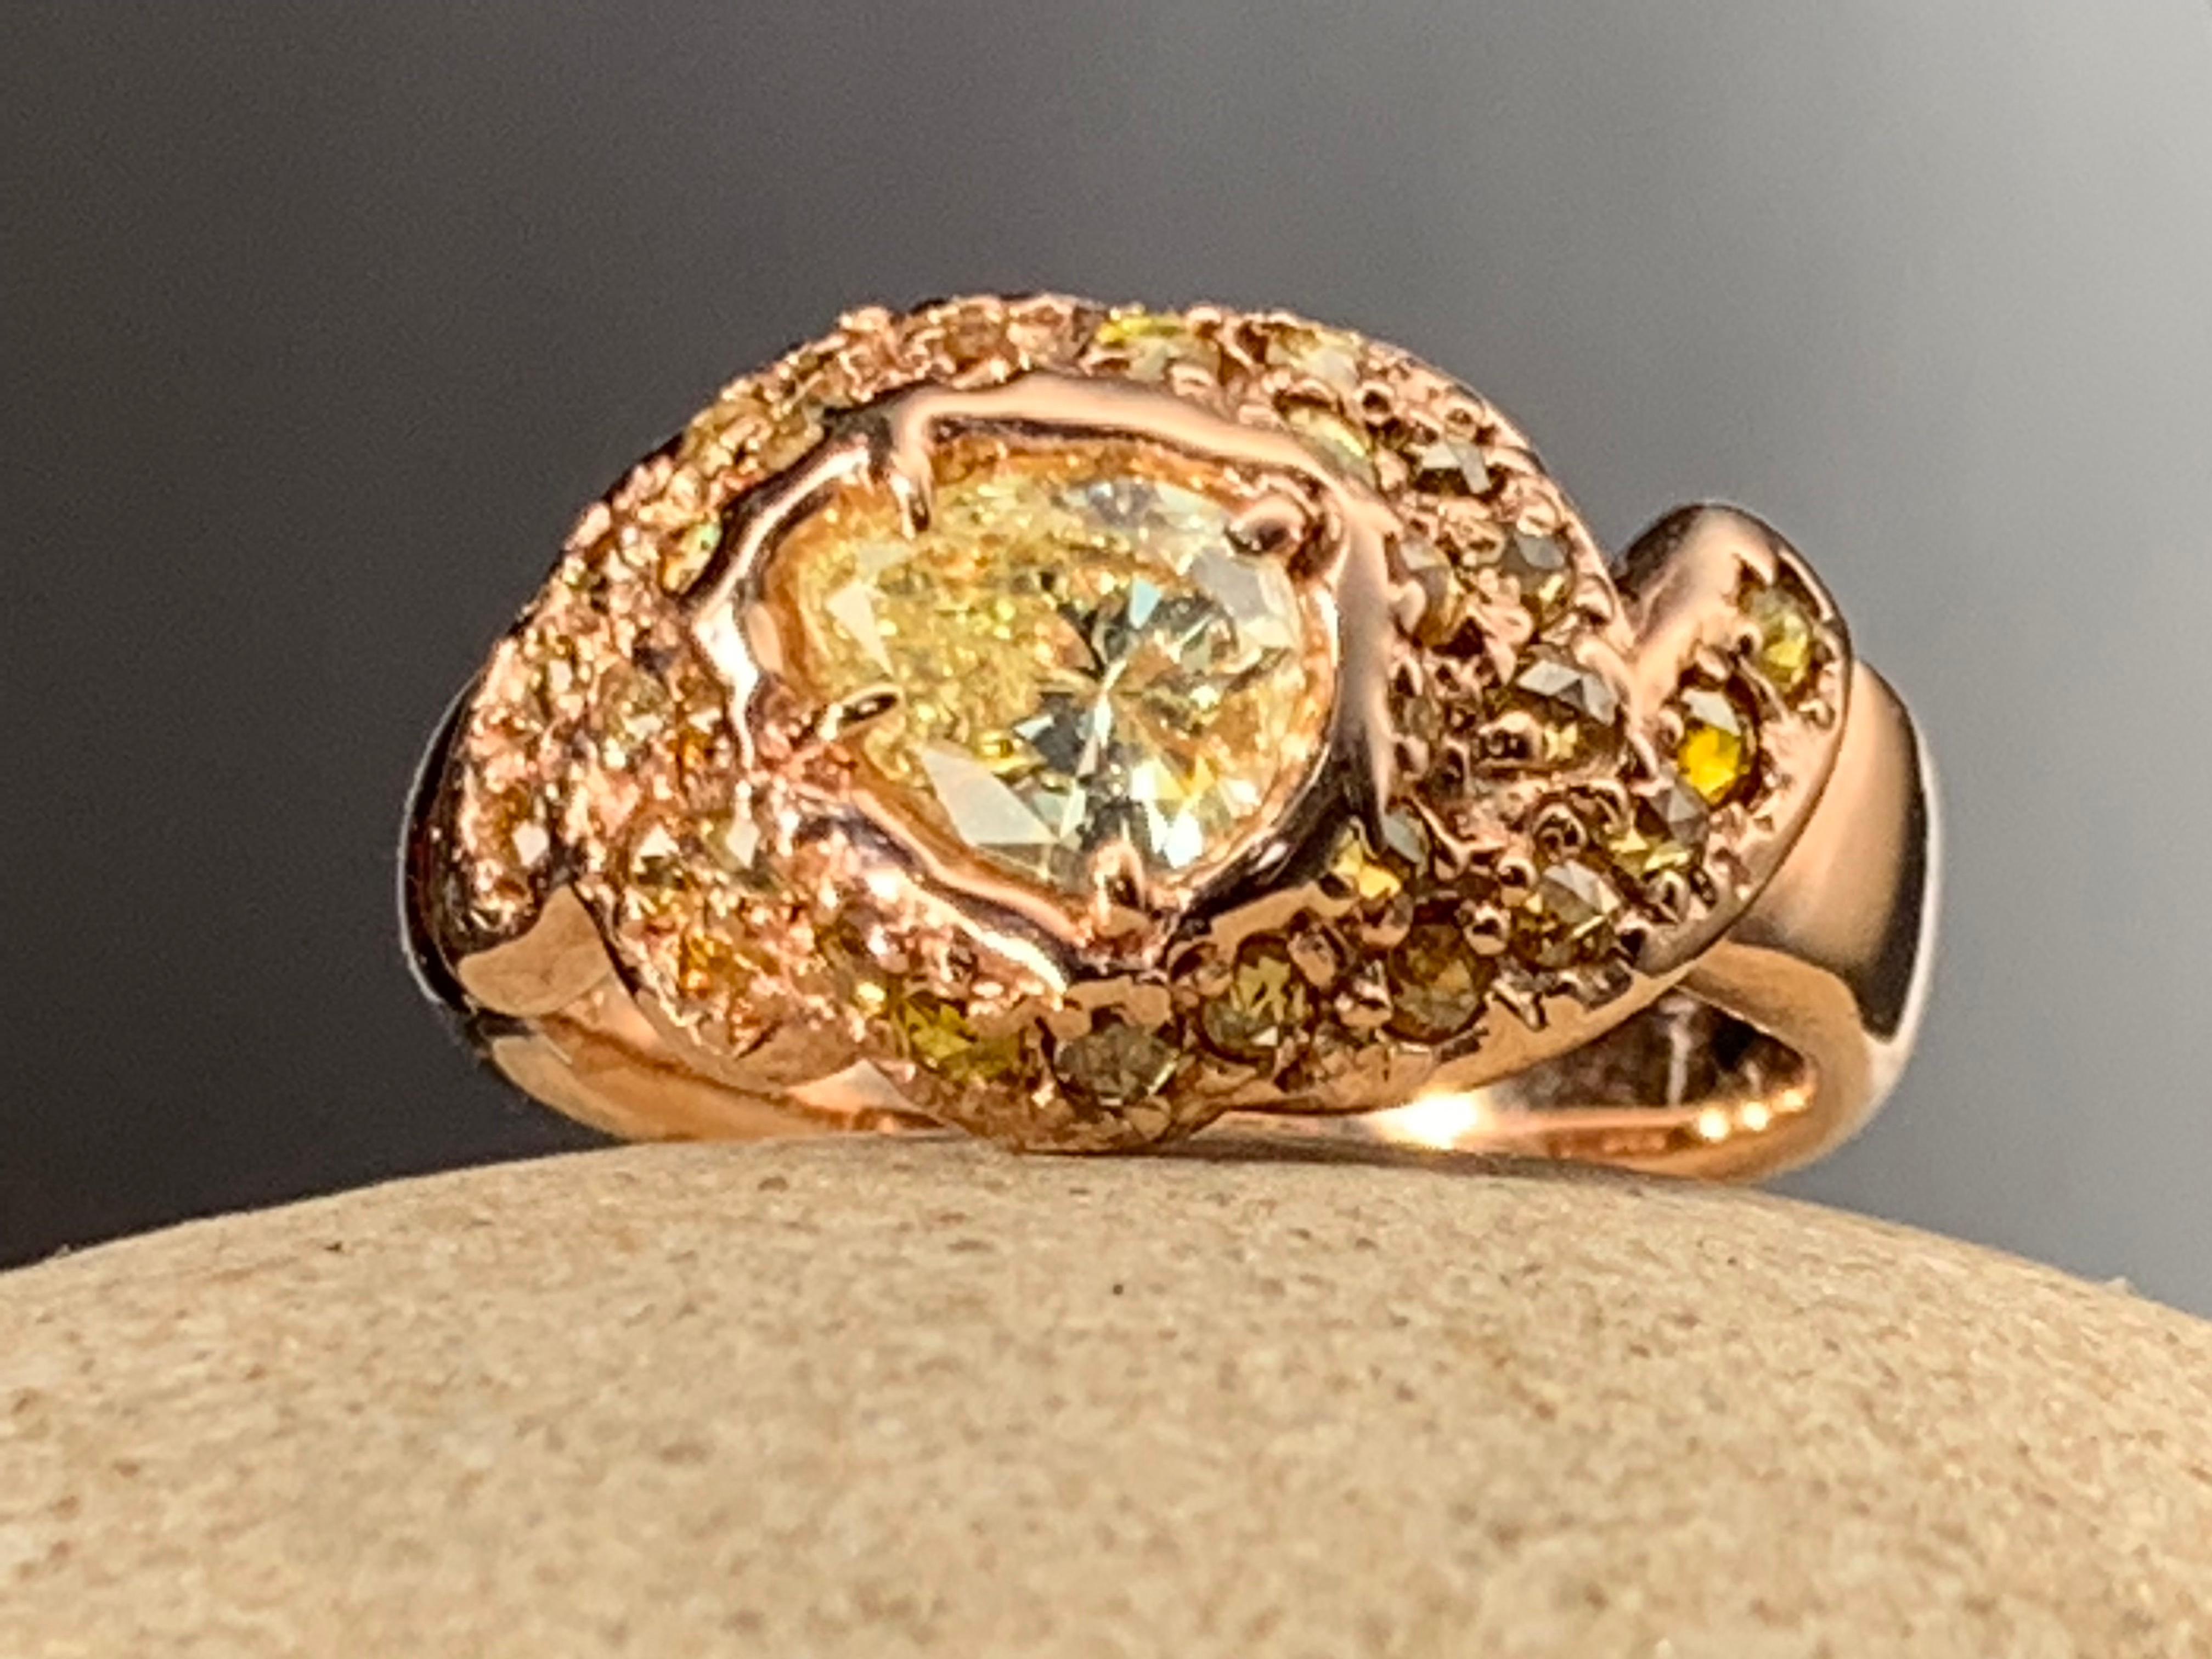 The one-of-a-kind organically sculpted Phoenix Flame ring is both a unique and a rich color experience. The gemmy yellow rose cut diamonds are of various hues and sparkle from all directions. The center yellow pear shape diamond is highly saturated